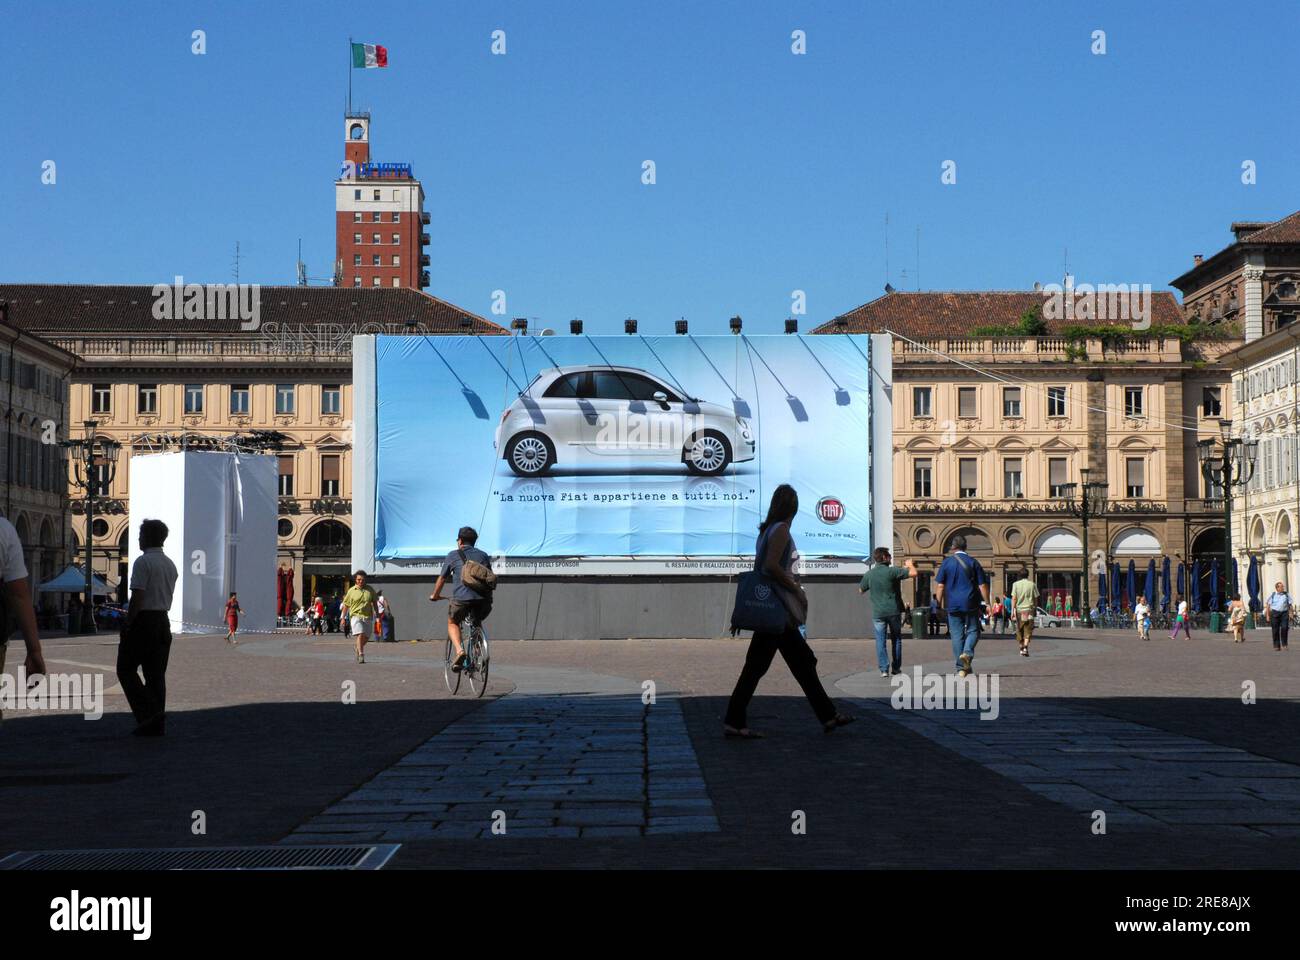 Torino, Italy - July 2007: Holyday in Turin for the launch event of the new Fiat 500. In 2007, the 50th anniversary of the Nuova 500's launch, Fiat la Stock Photo